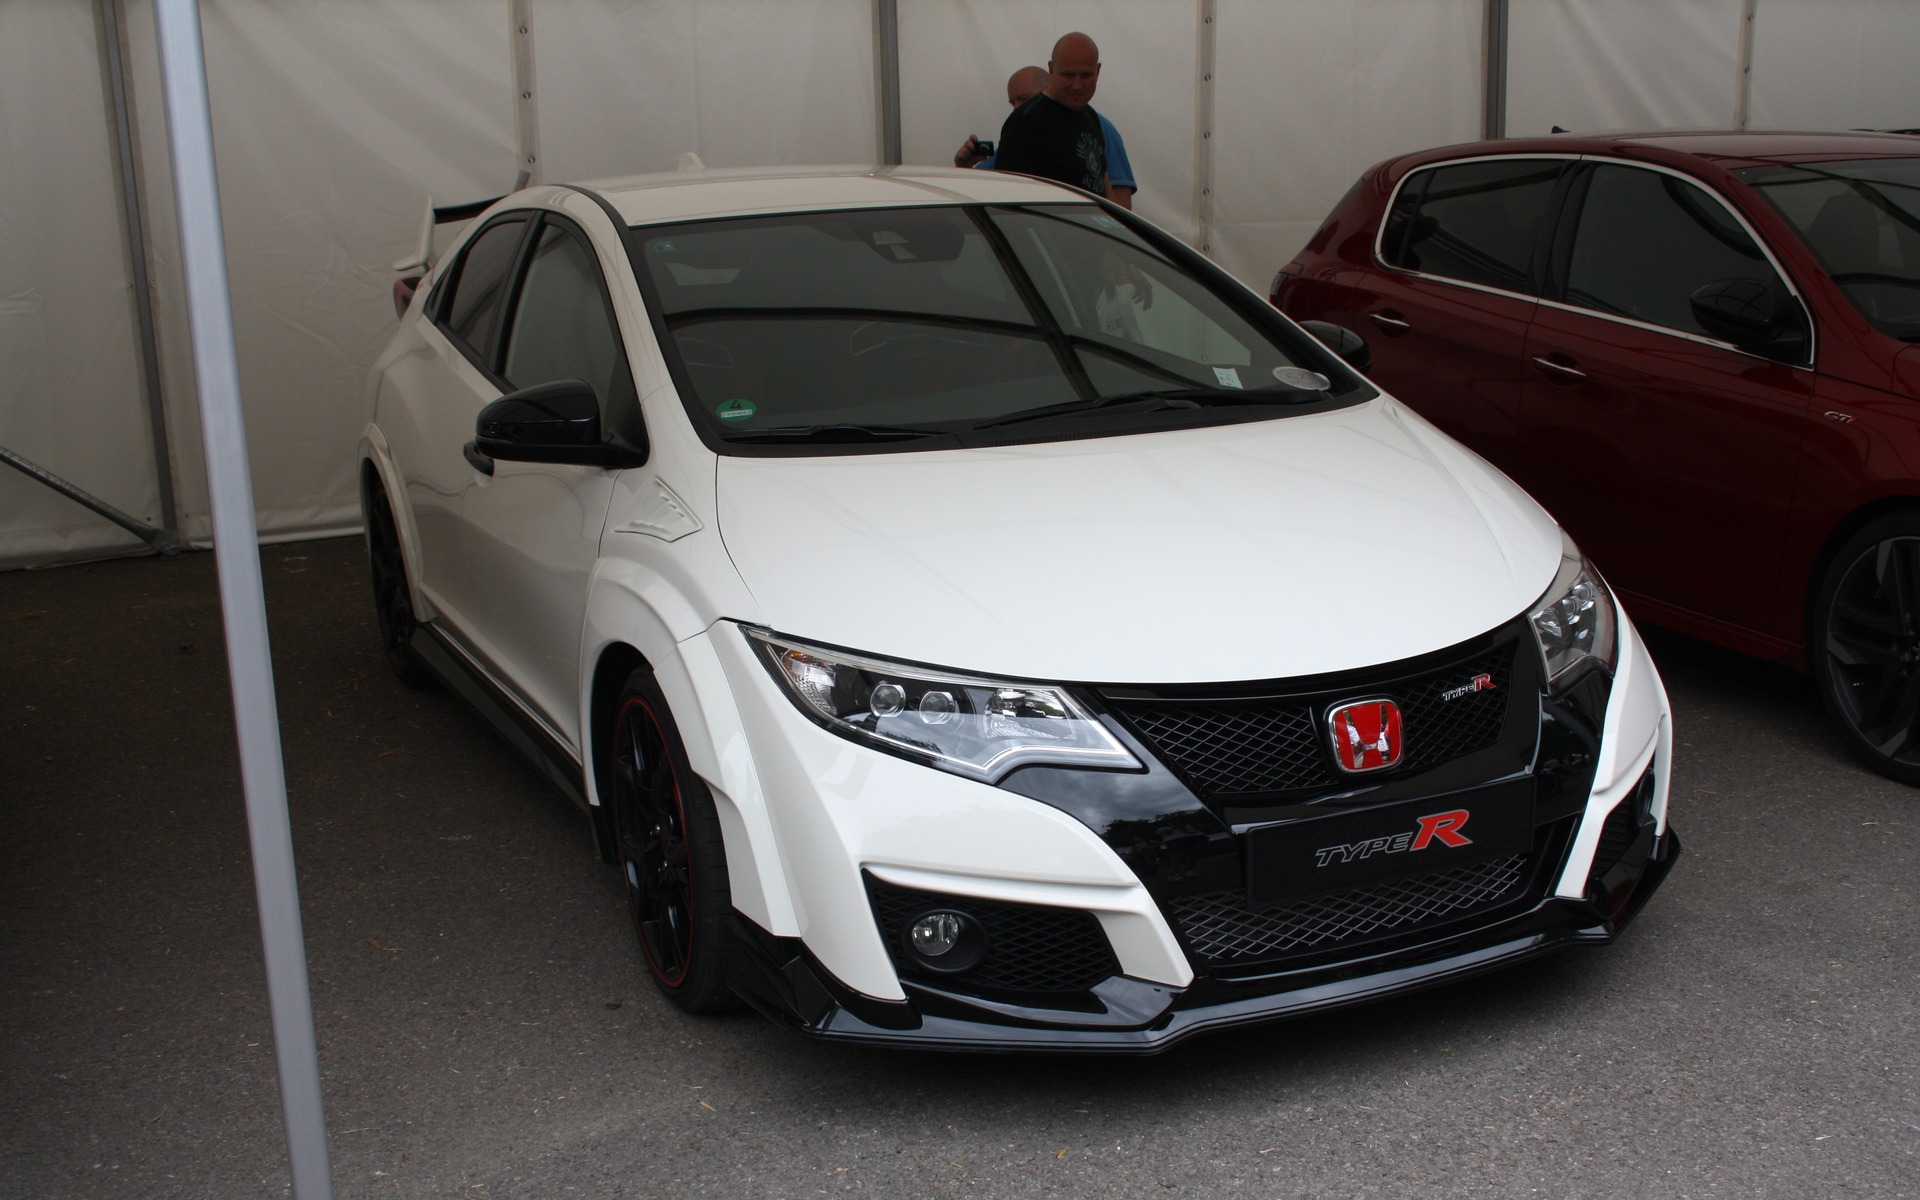 10 : Honda Civic Type-R... We can't wait to drive this one!